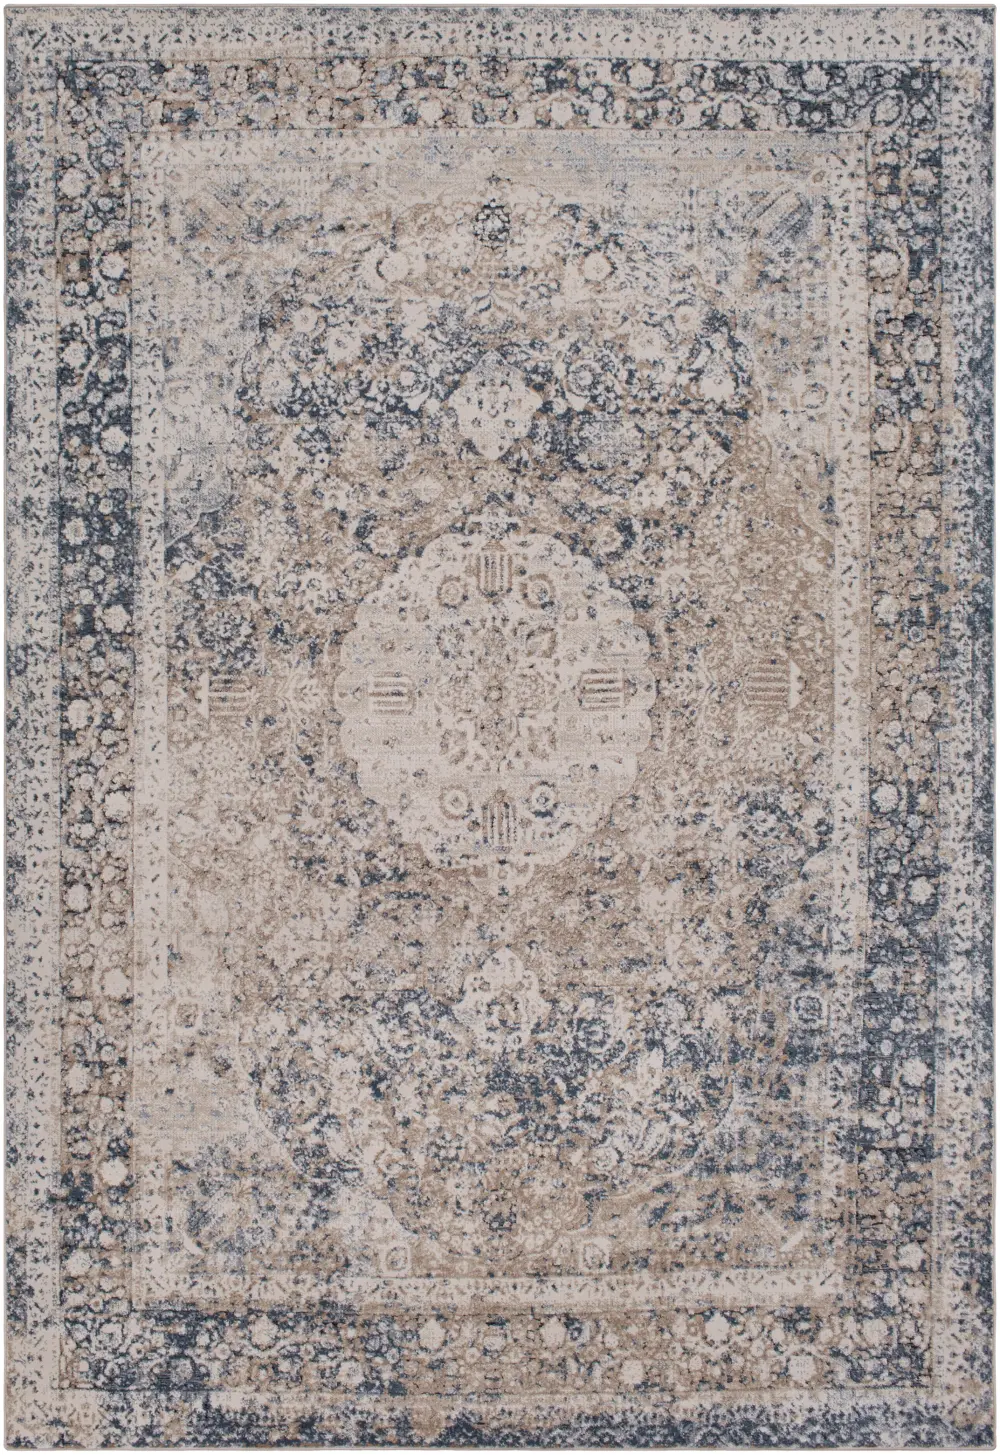 9 x 12 X-Large Taupe and Charcoal Gray Area Rug - Durham-1